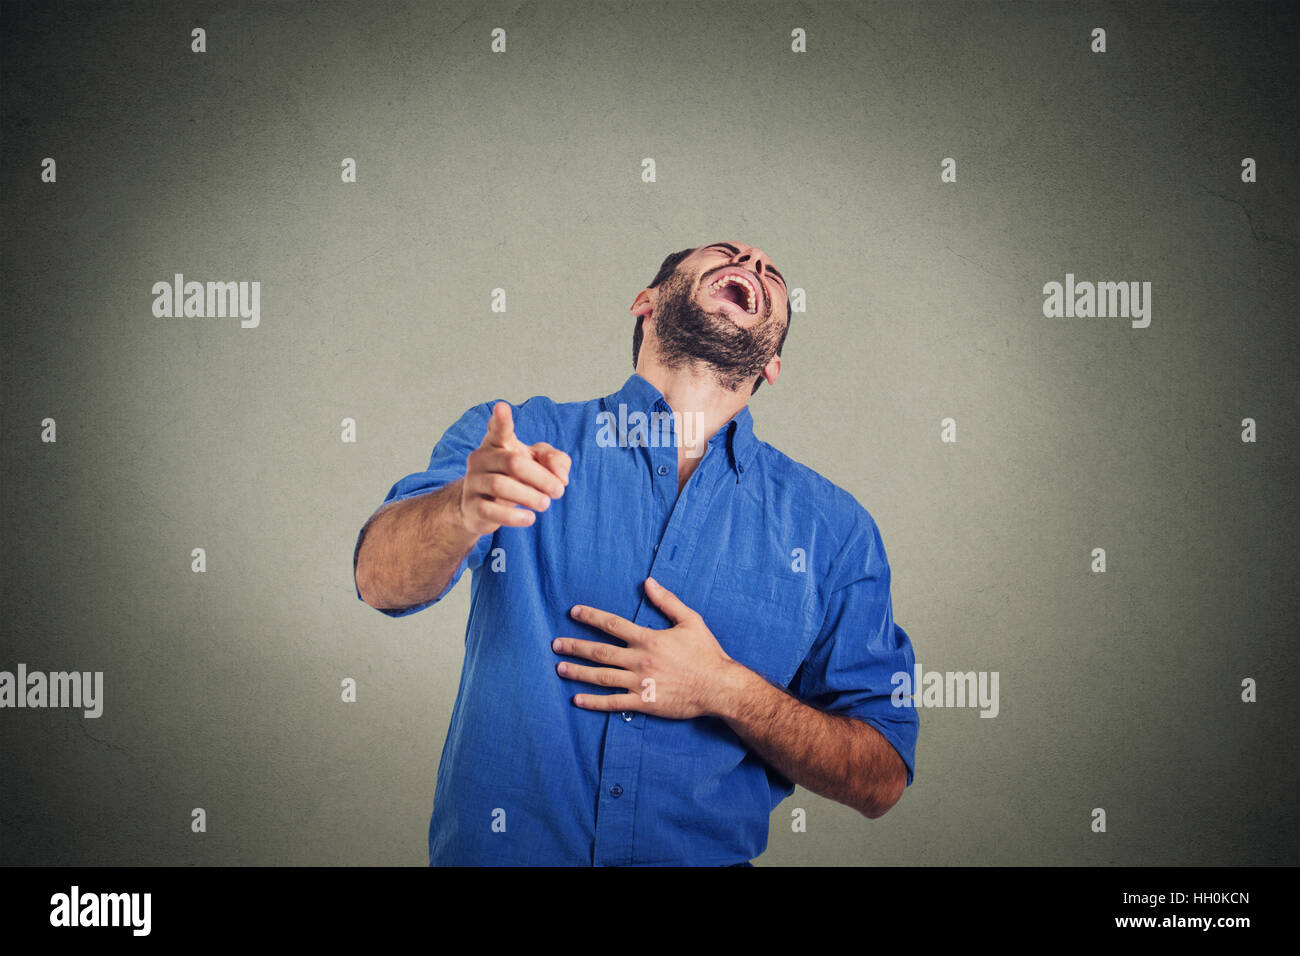 Laughing young man Stock Photo